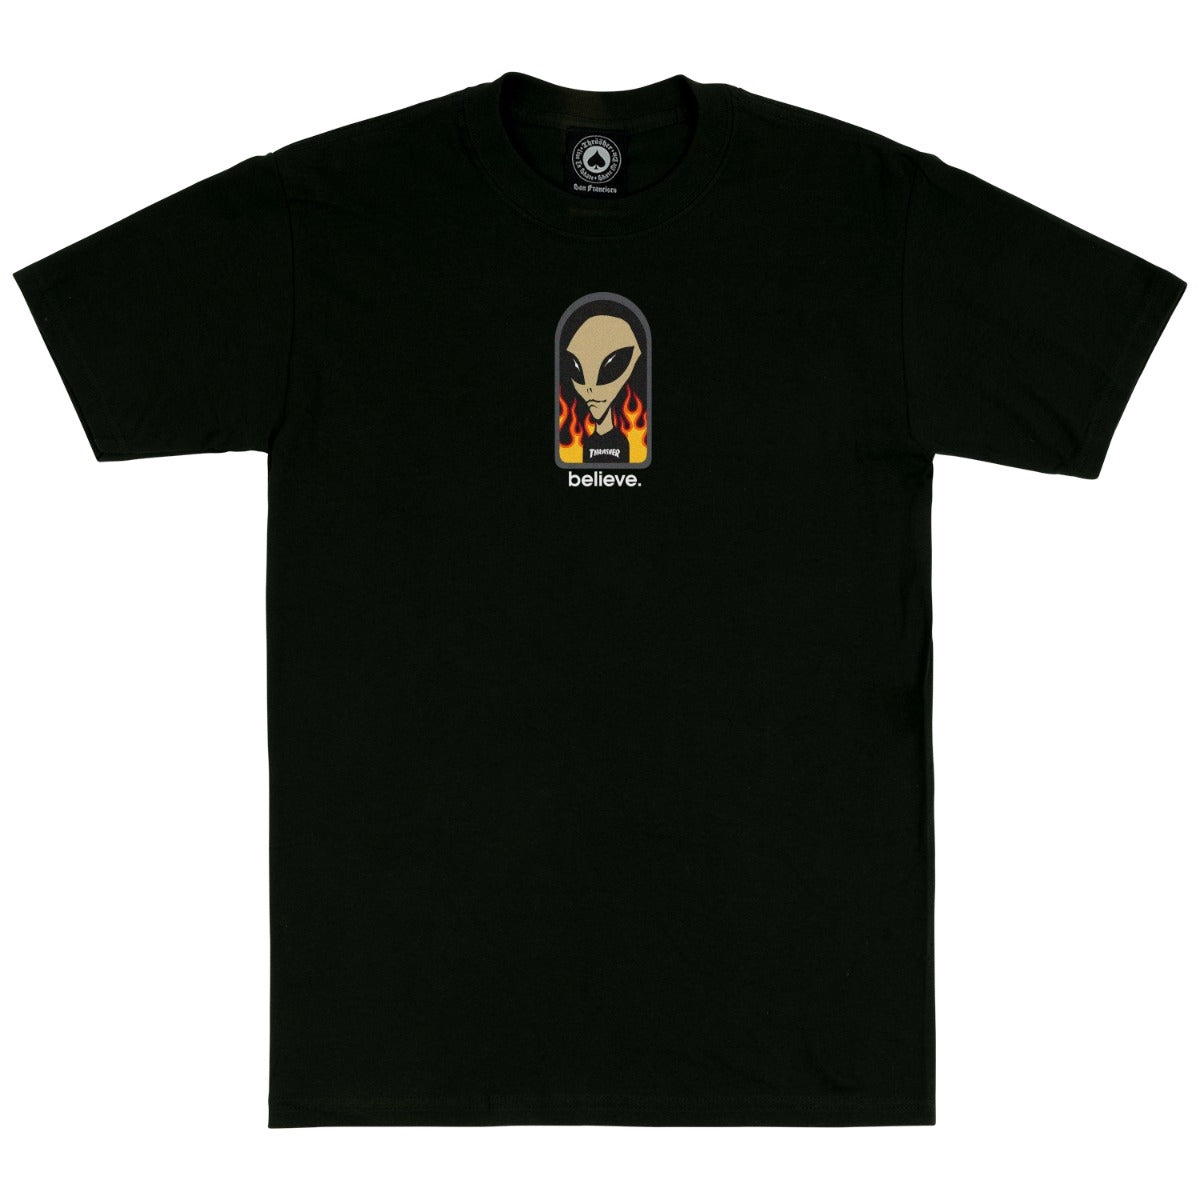 Thrasher X AWS Believe S/S tee Shirt Blk(size options listed)